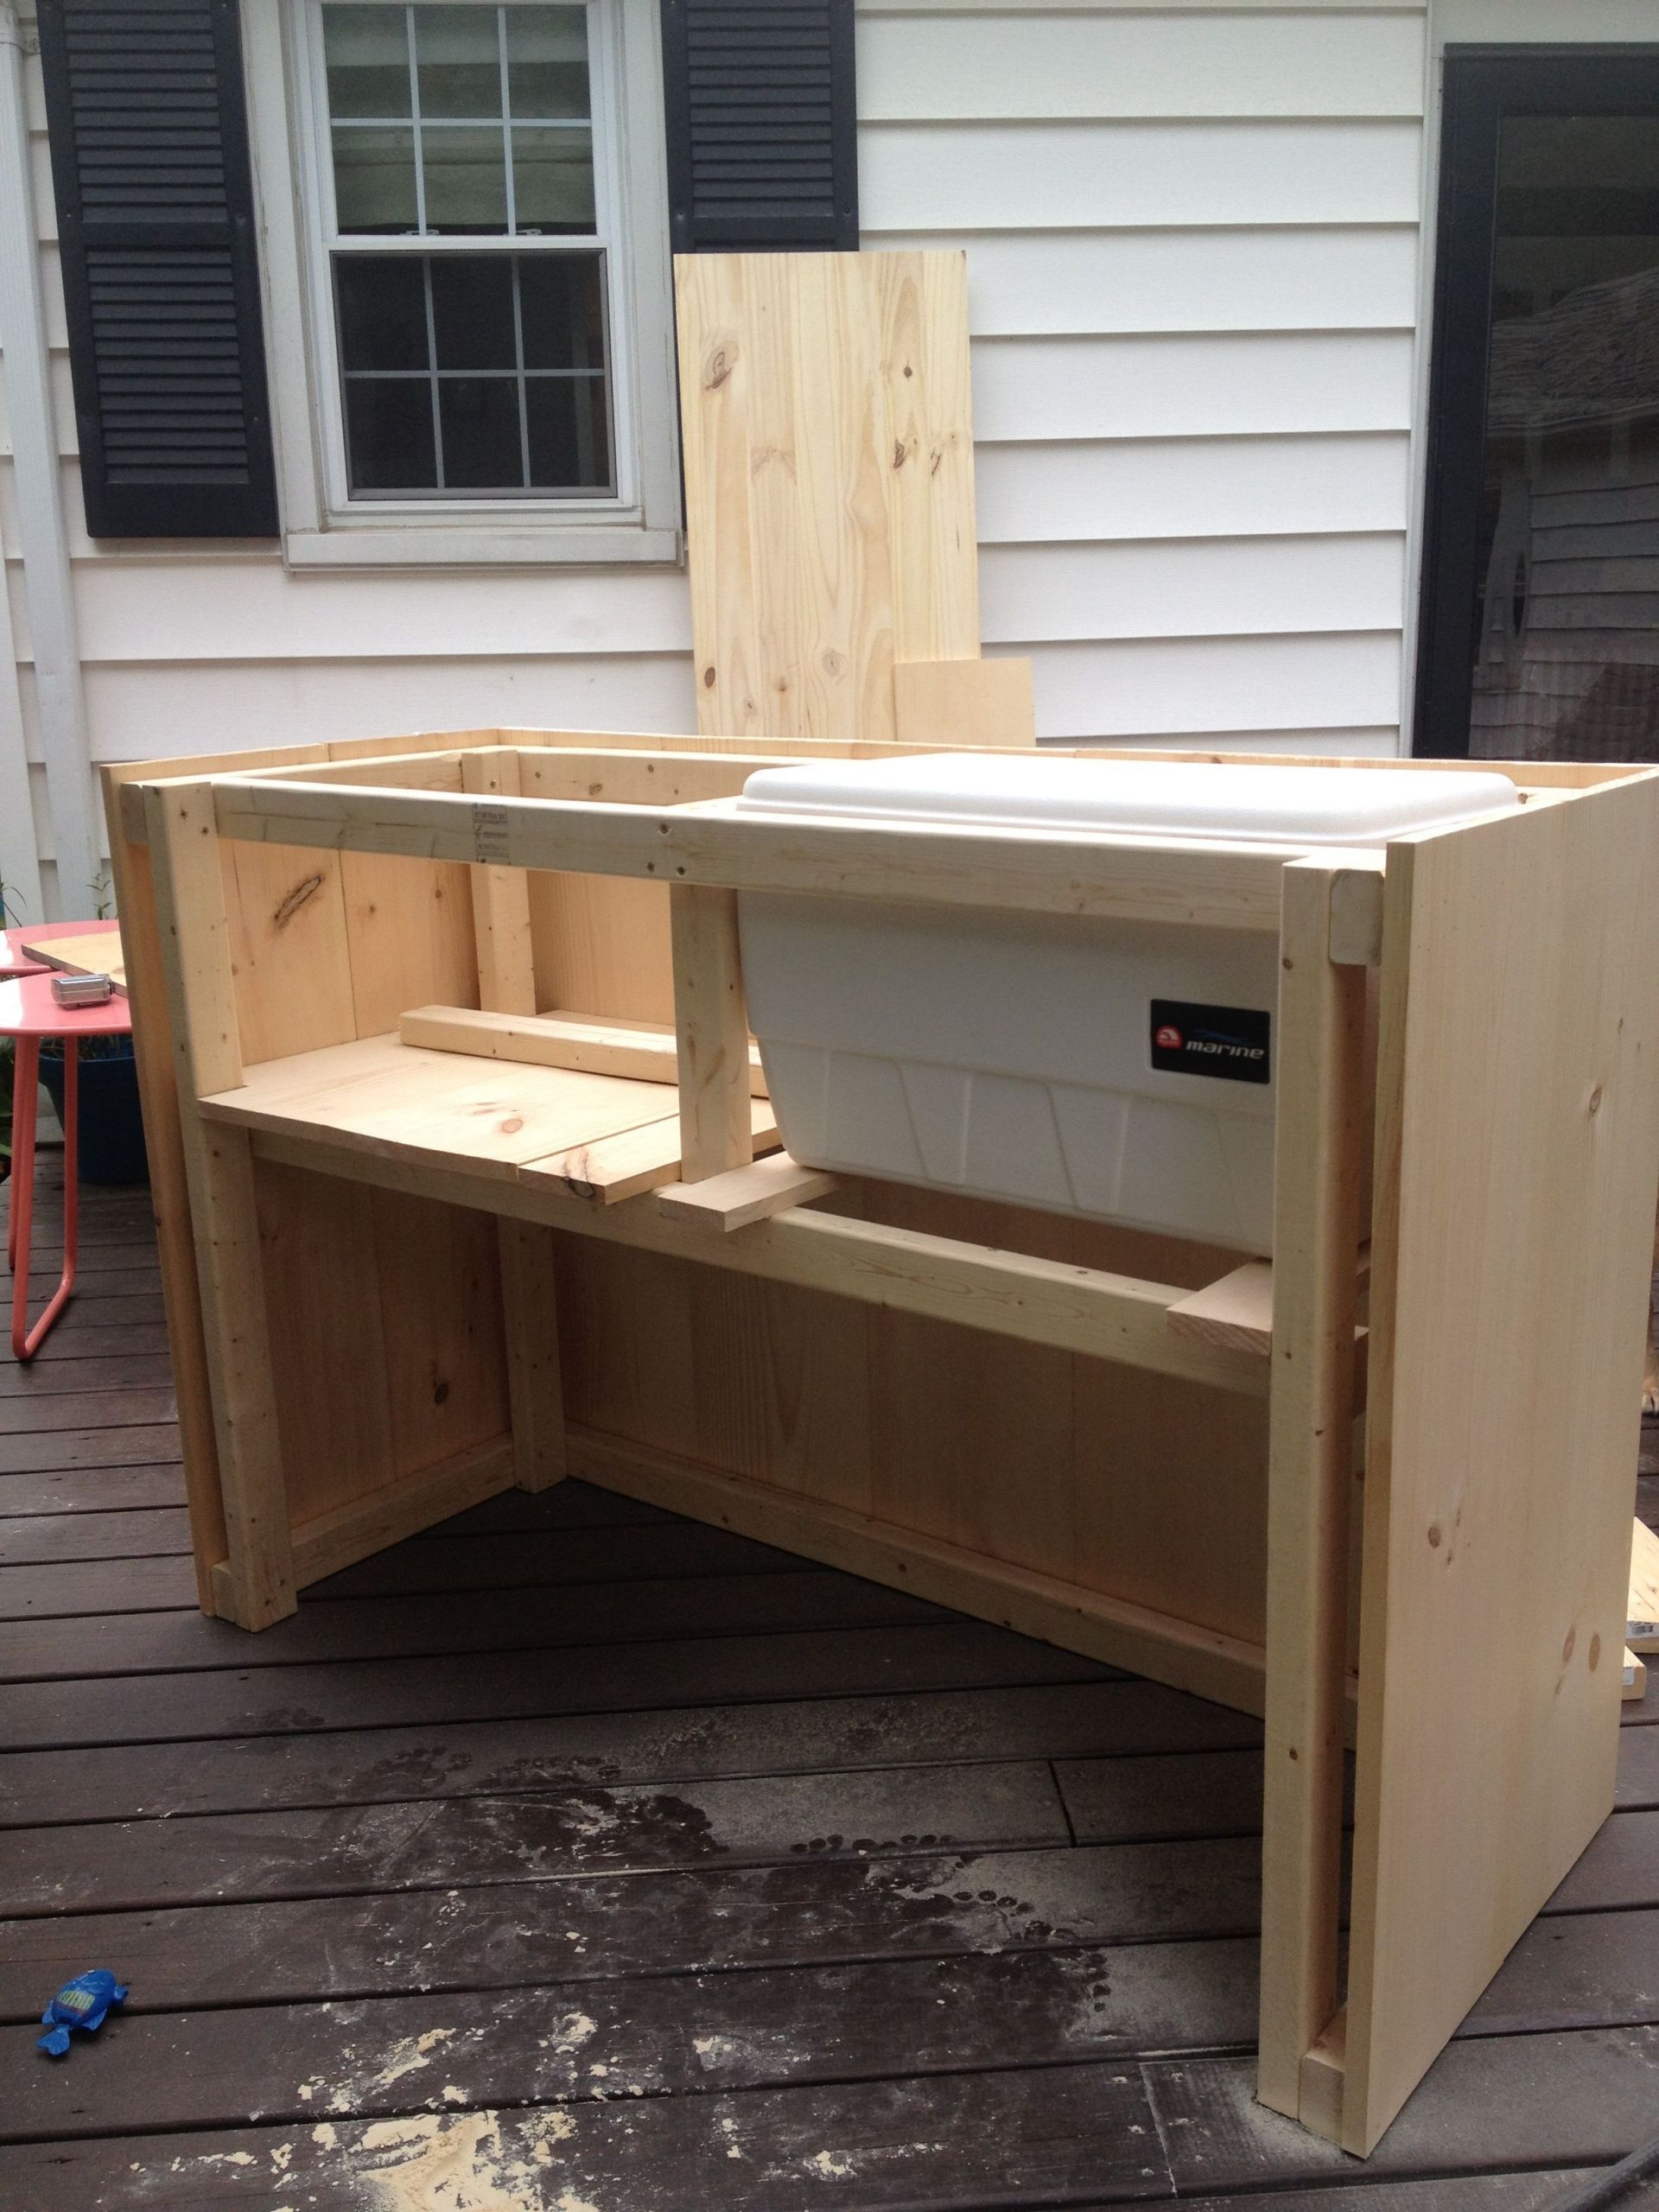 DIY Patio Bar Plans
 DIY steps for Outdoor bar with built in cooler in 2019